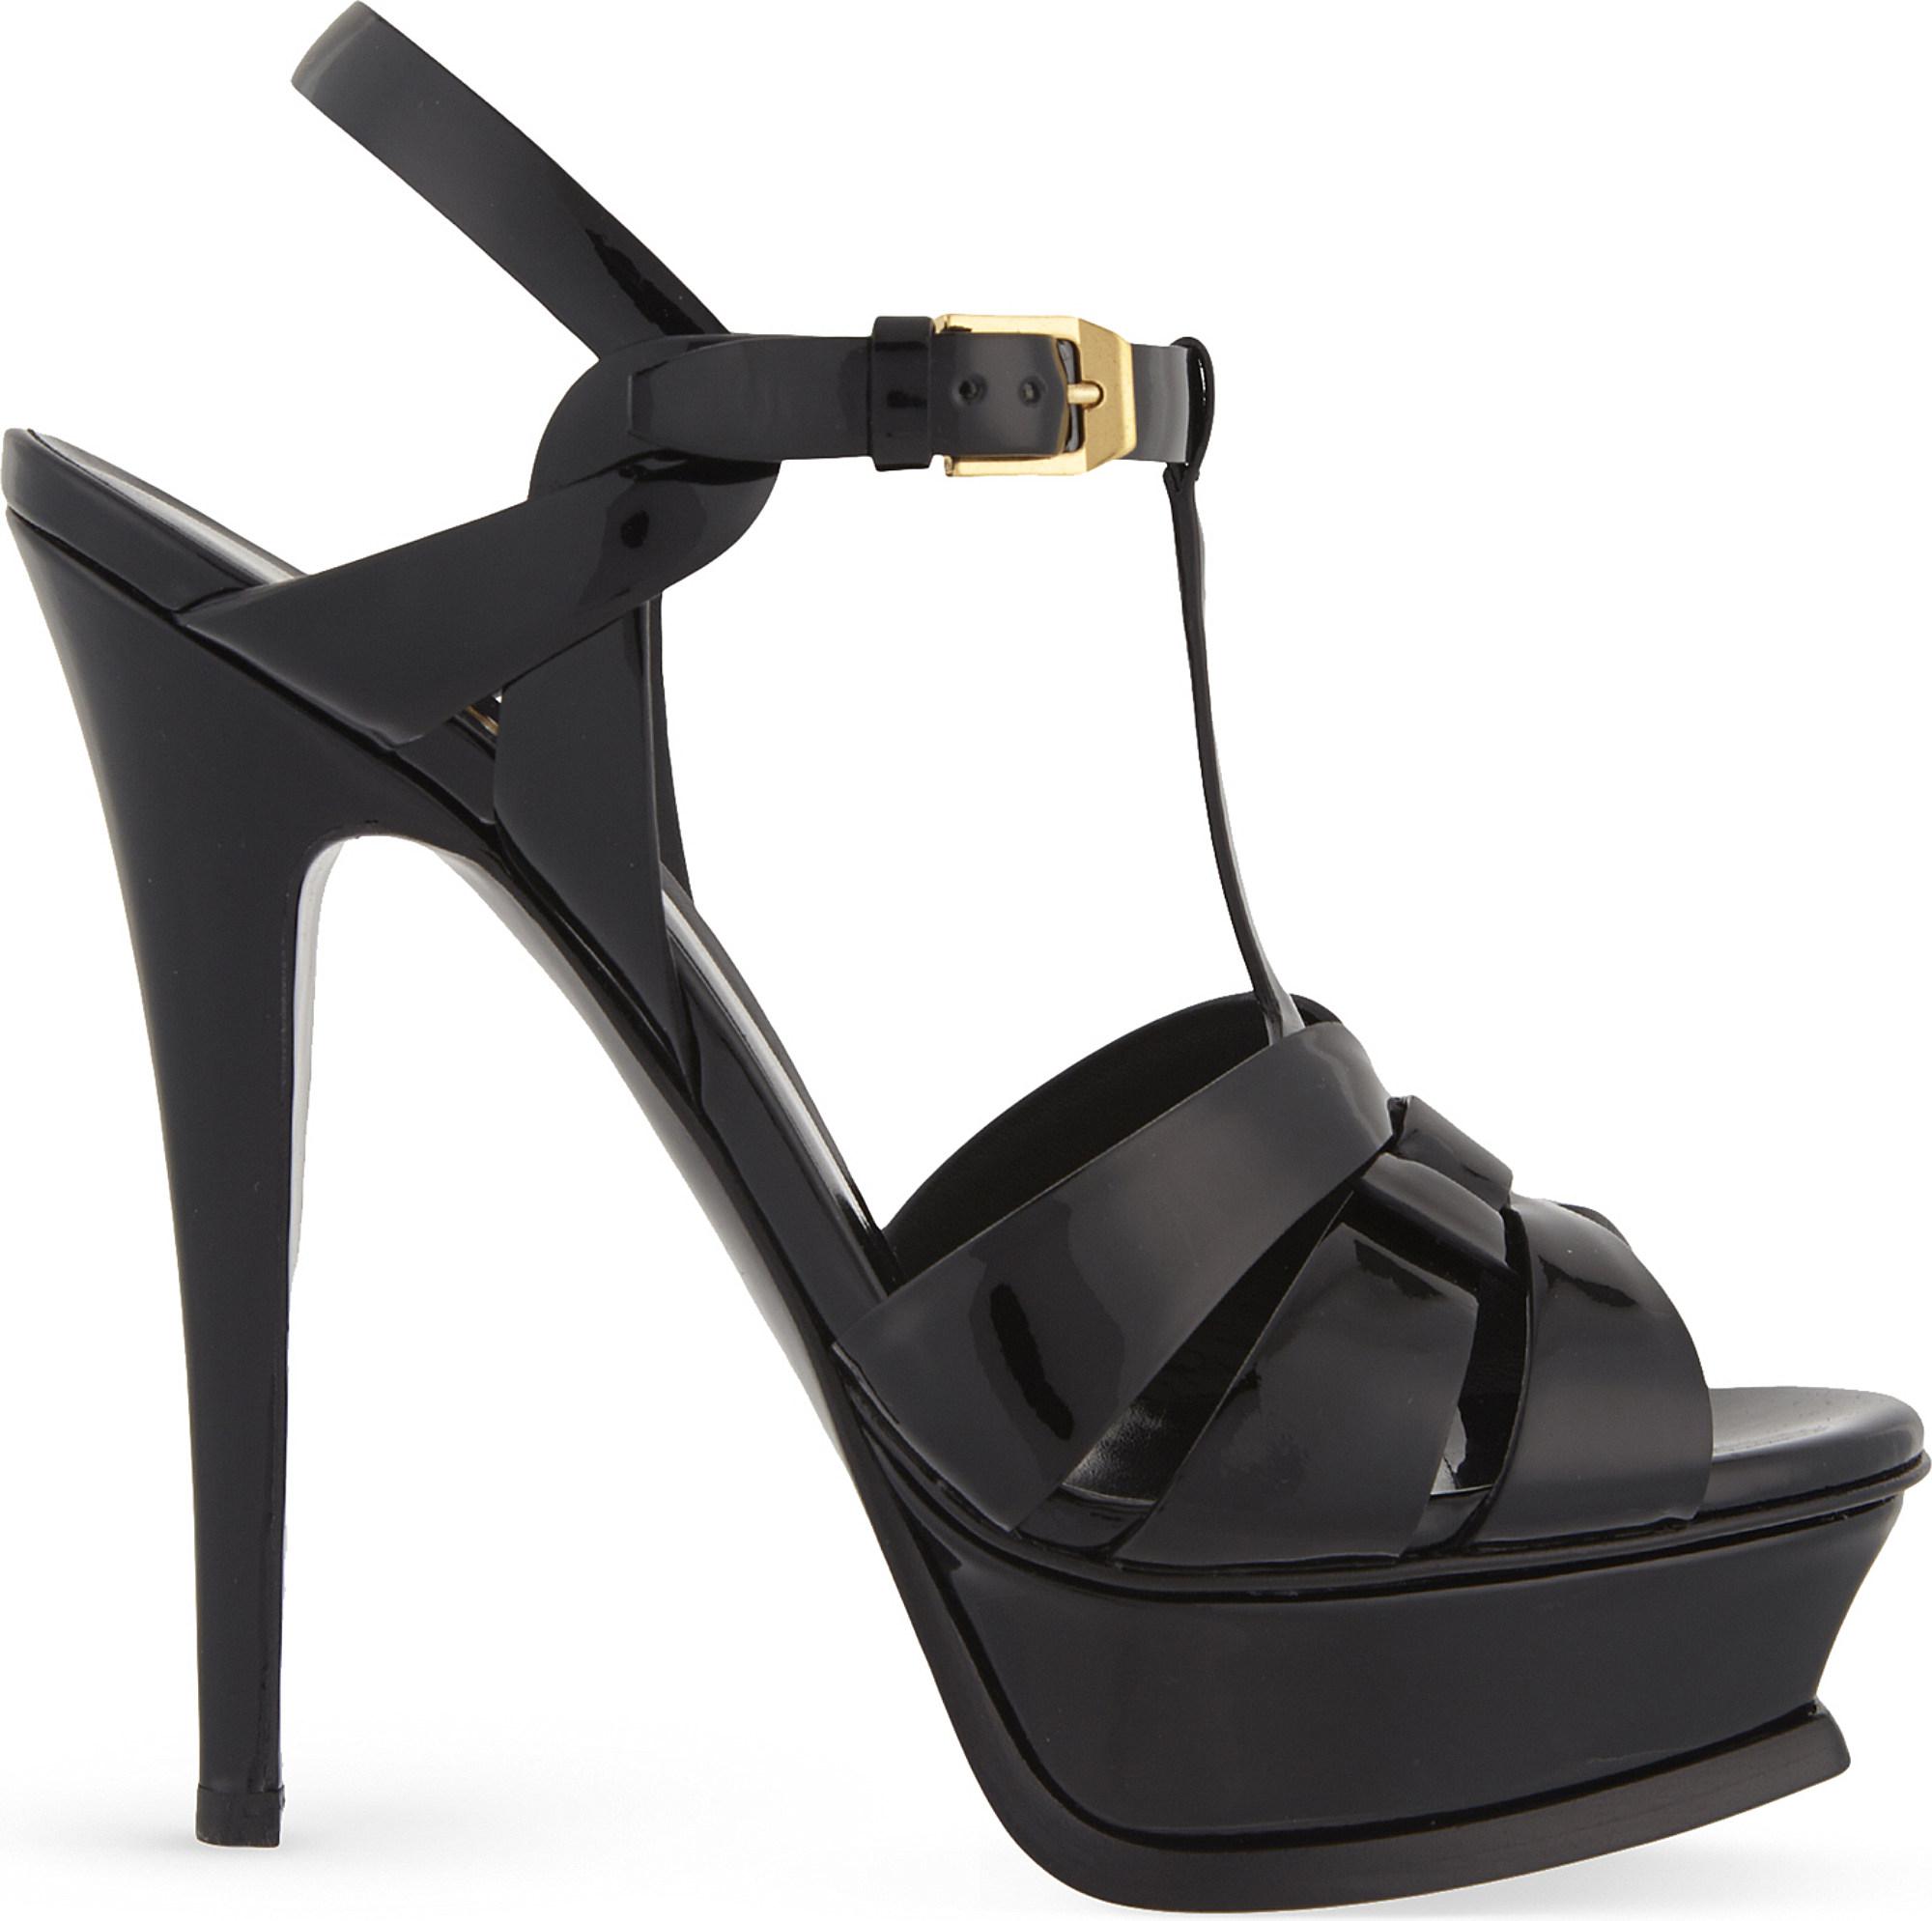 Lyst Saint Laurent Tribute 105 Patent Leather Heeled Sandals In Black Save 61 2972972972973